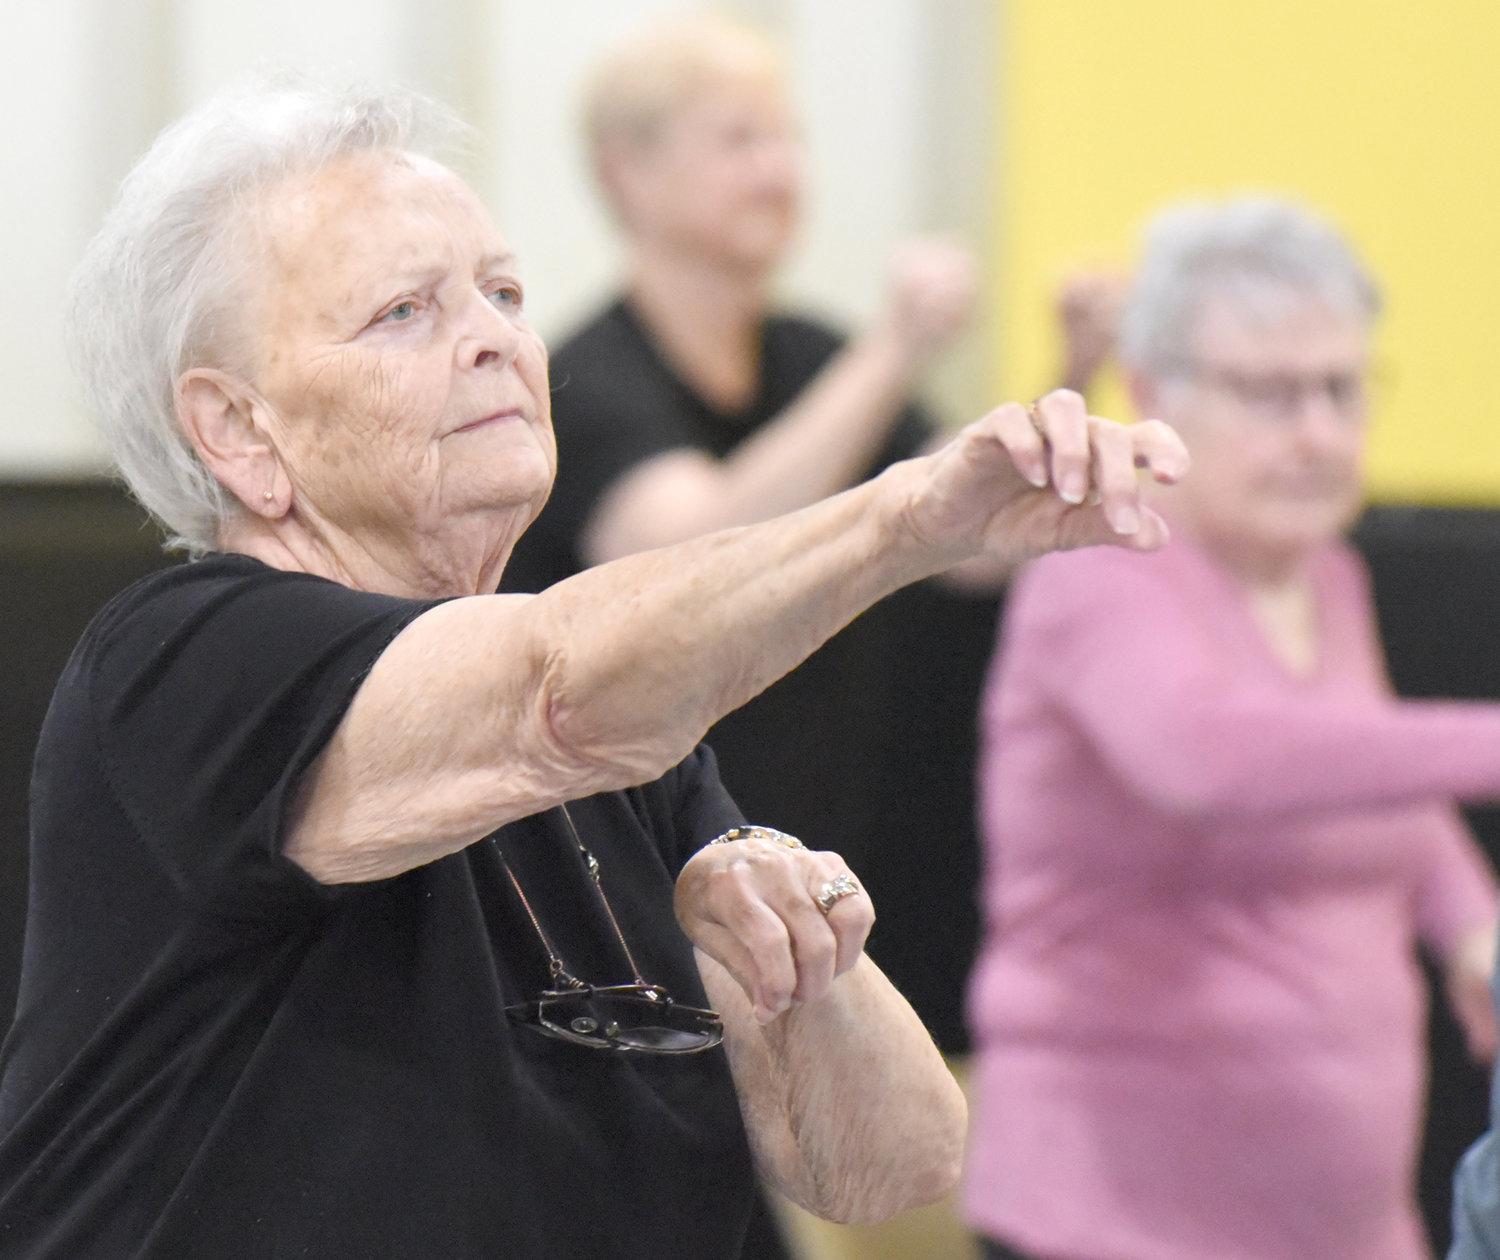 Exercises in the senior fitness class at the Lone Tree Wellness Center includes one with a boxing motion.